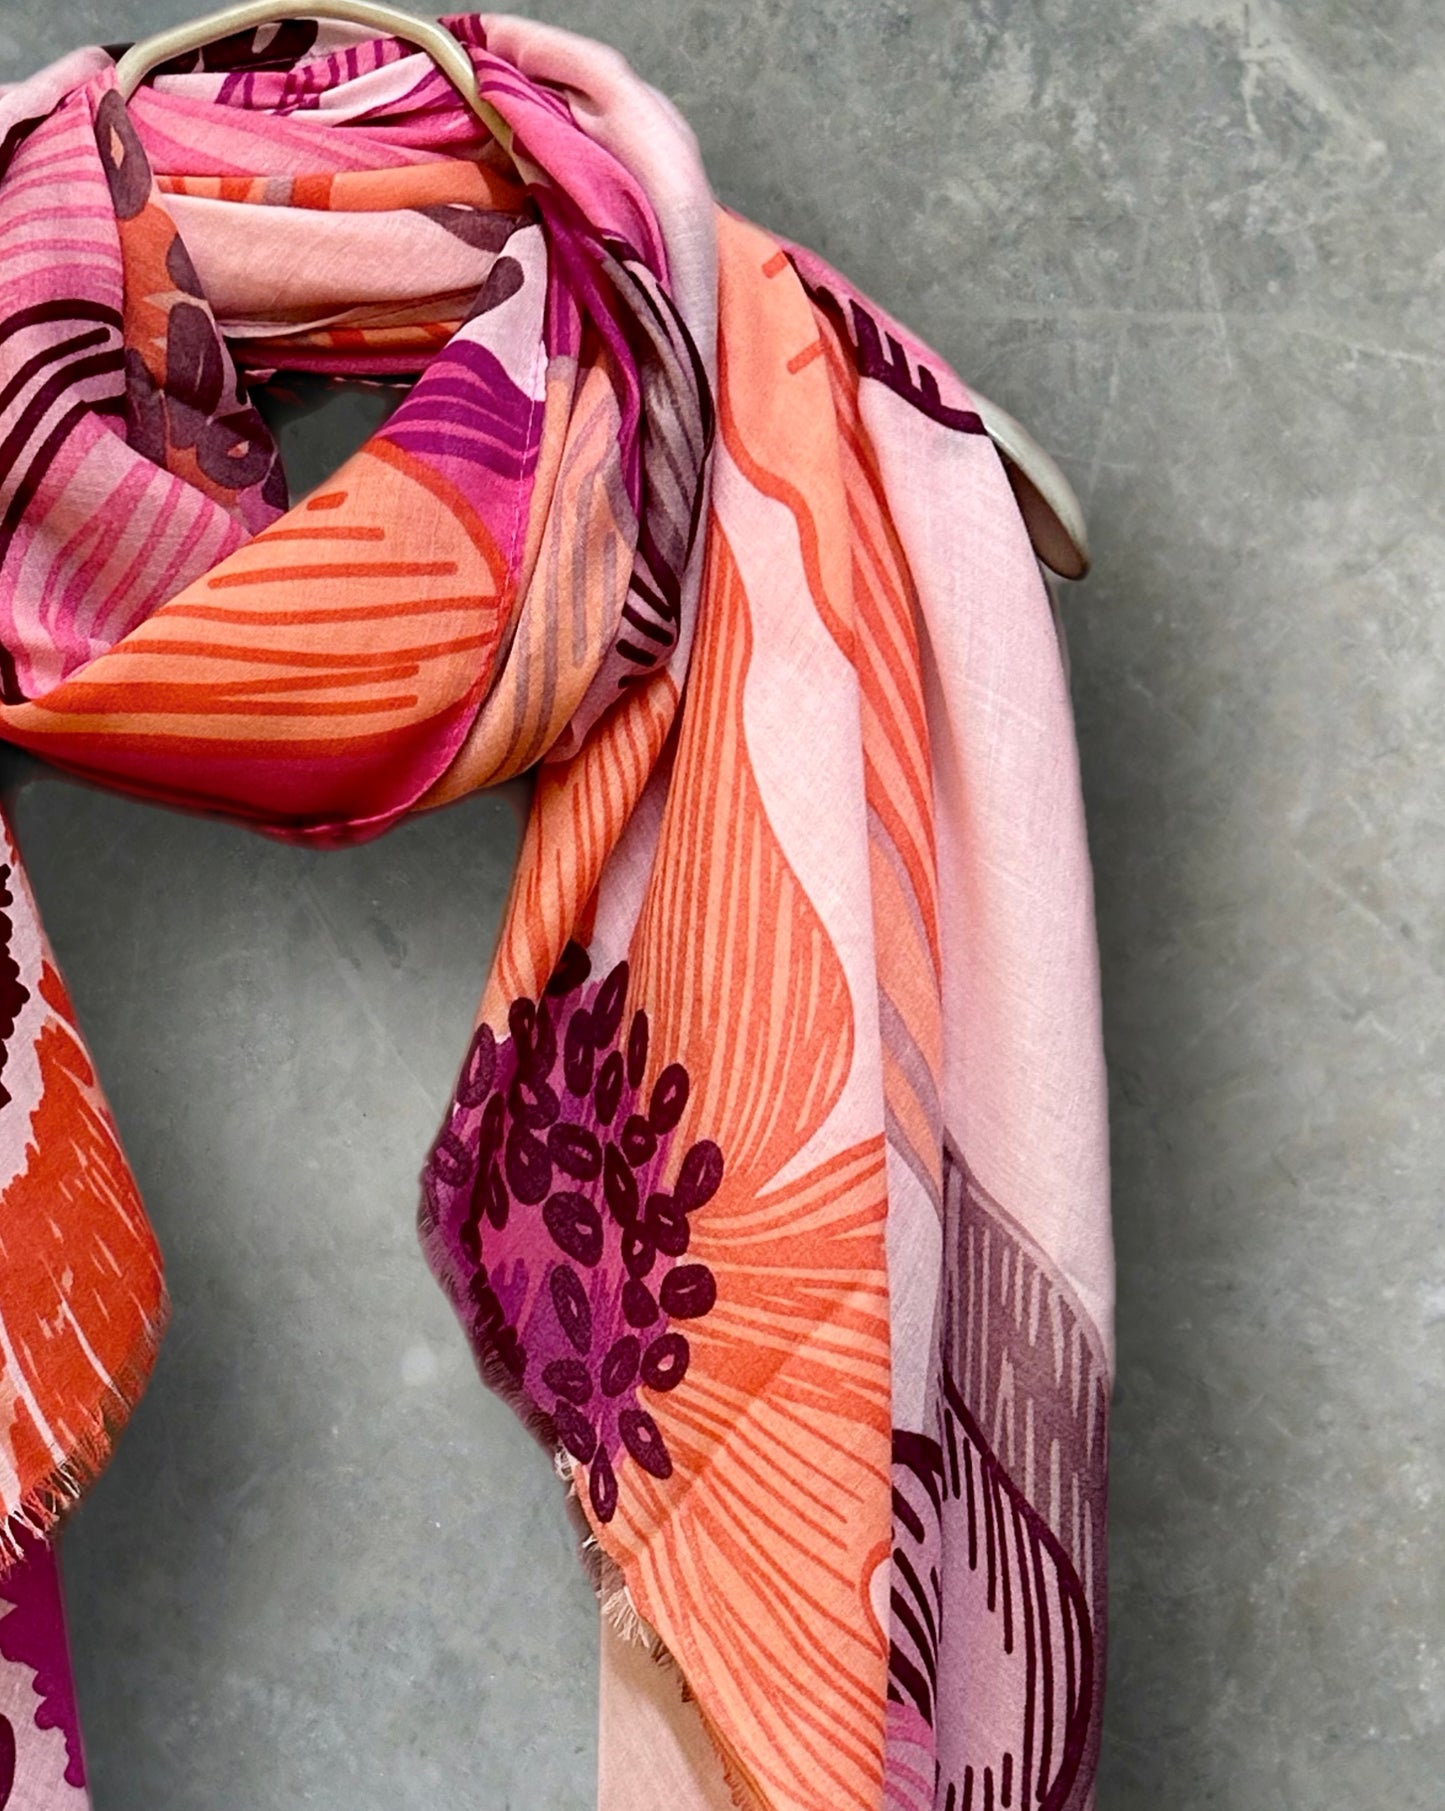 Stunning Pink Scarf Featuring Huge Sketched Flowers for Women,Great for All Seasons,Perfect Gifts for Her,Mother,Birthday and Christmas.